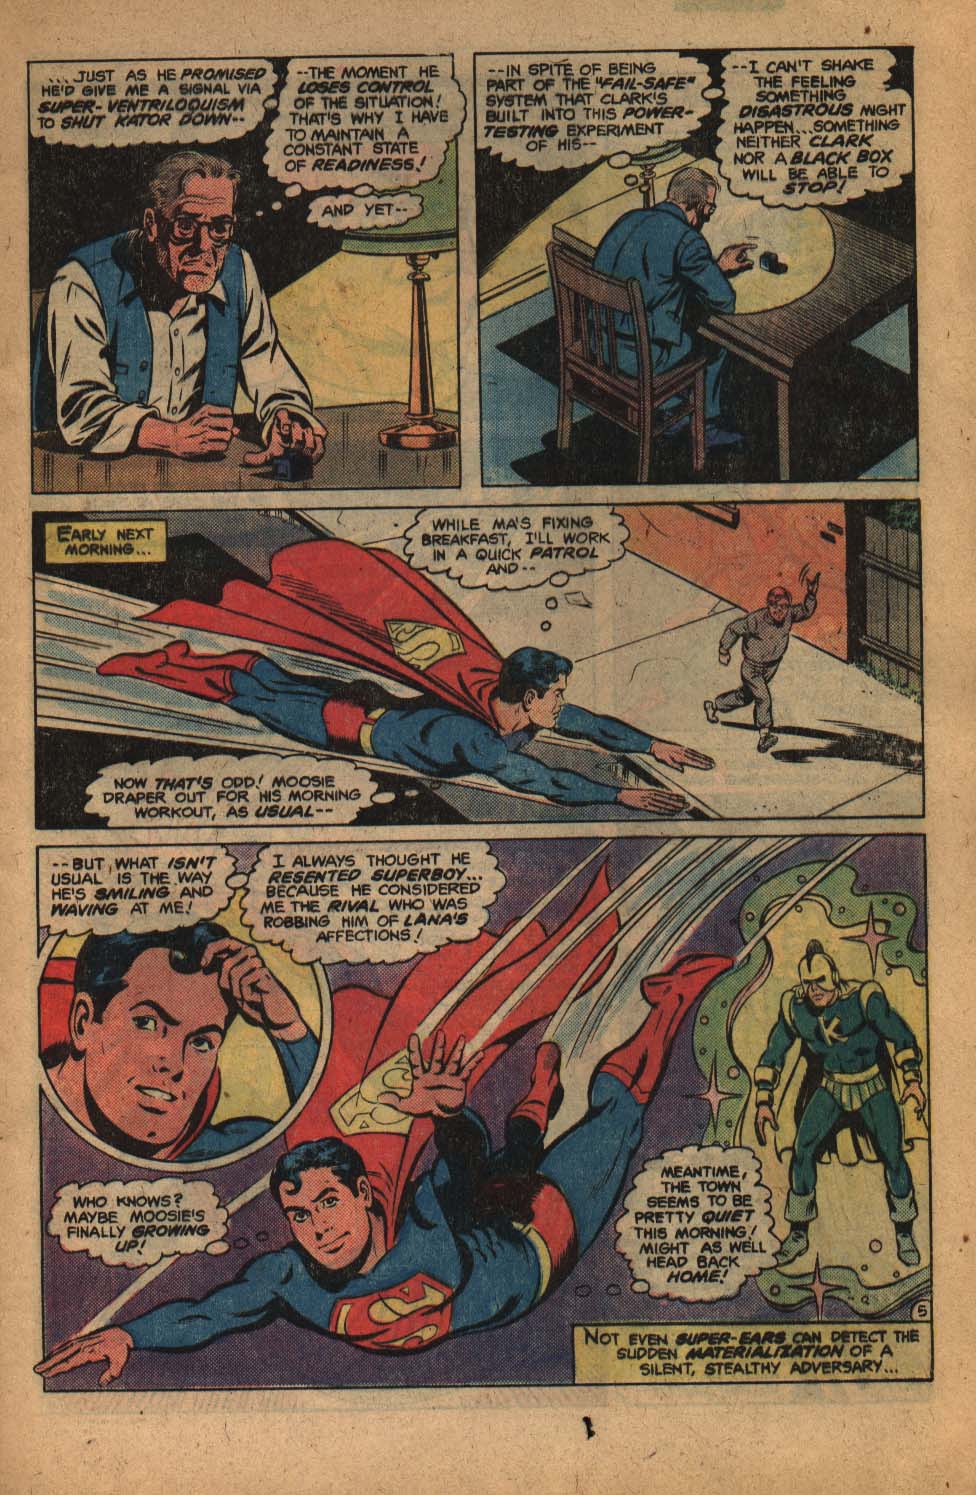 The New Adventures of Superboy 18 Page 8